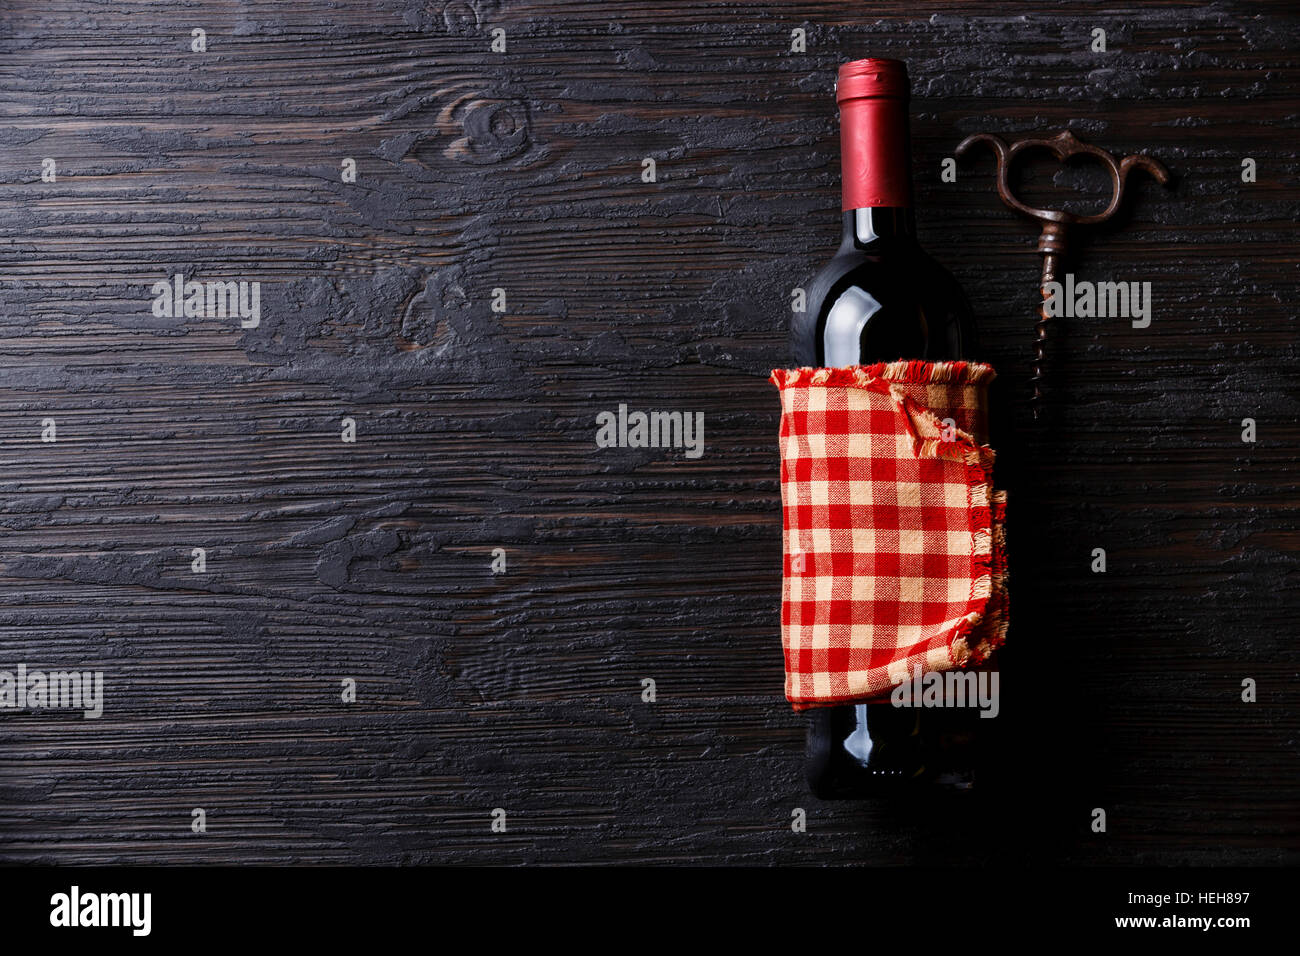 Wine bottle and corkscrew on Black Burned wooden background copy space Stock Photo